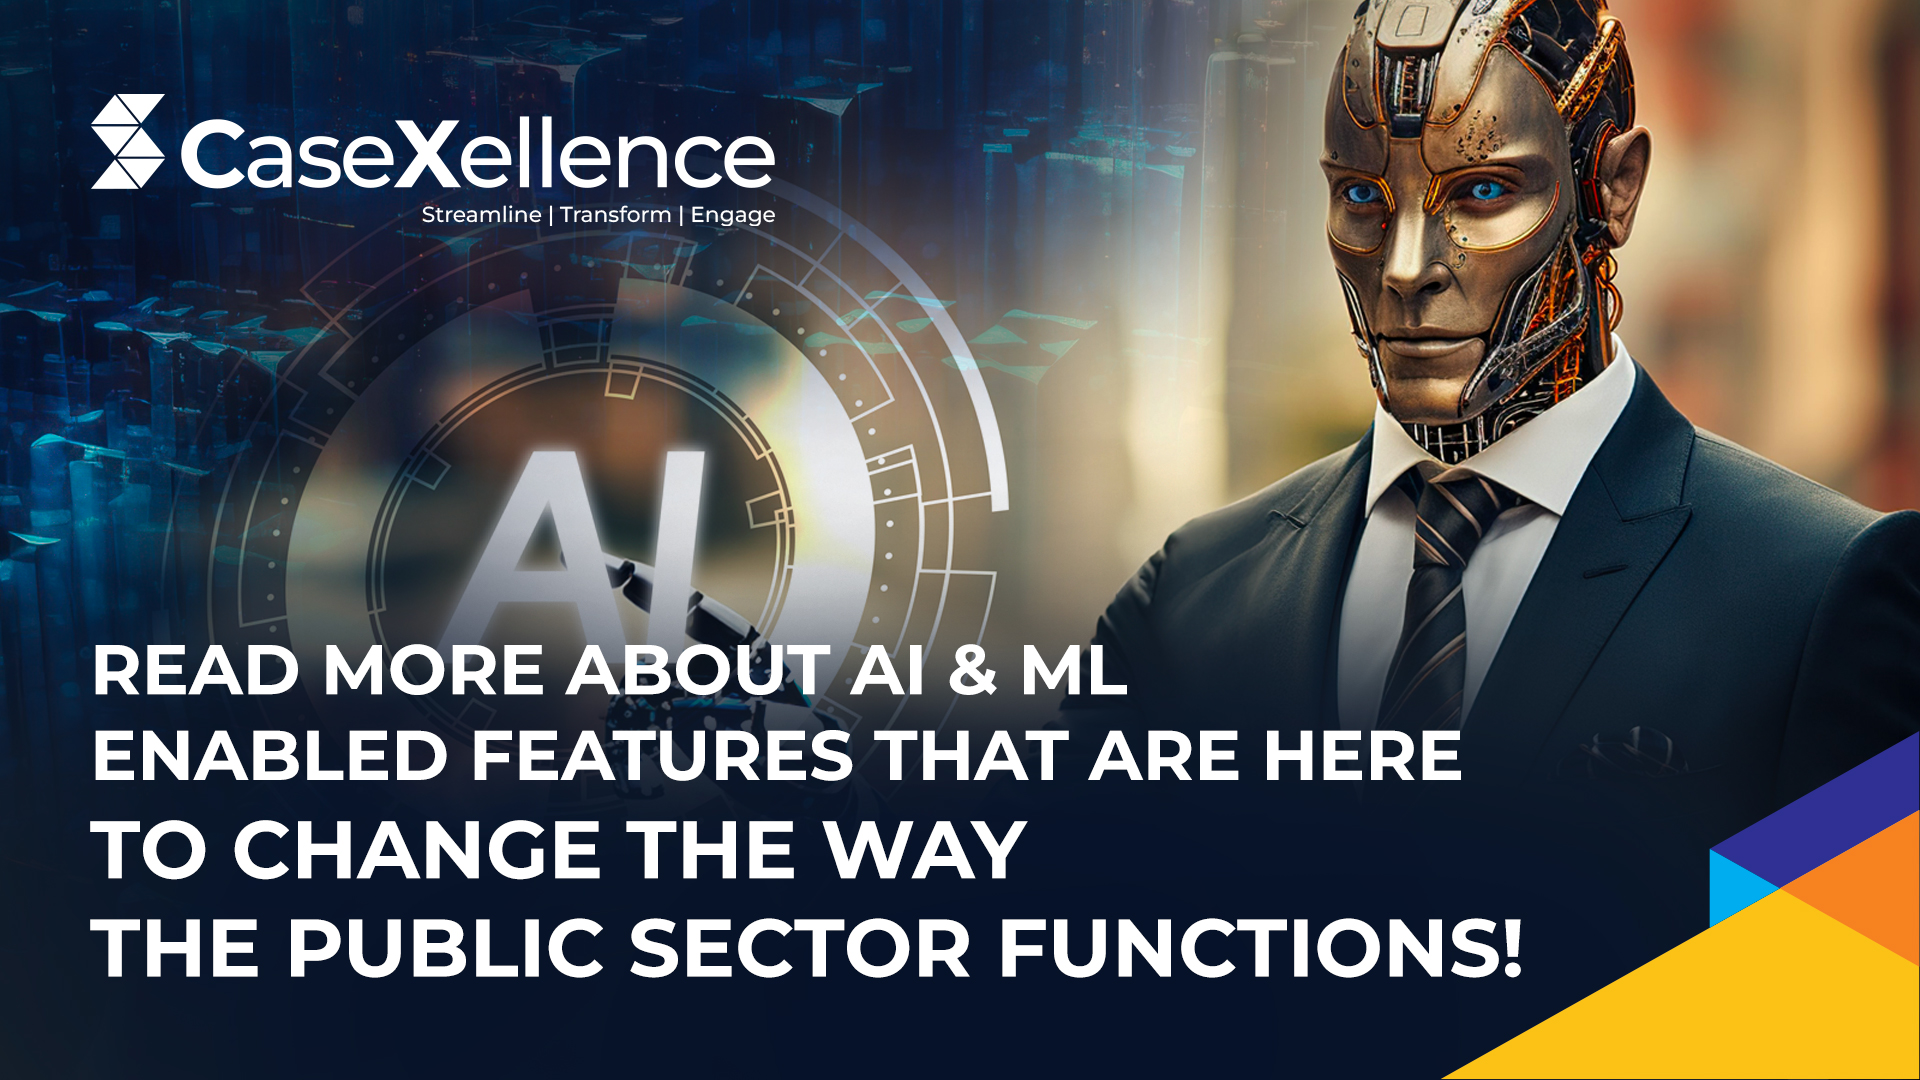 Read more about AI & ML enabled features that are here to change the way the public sector functions!